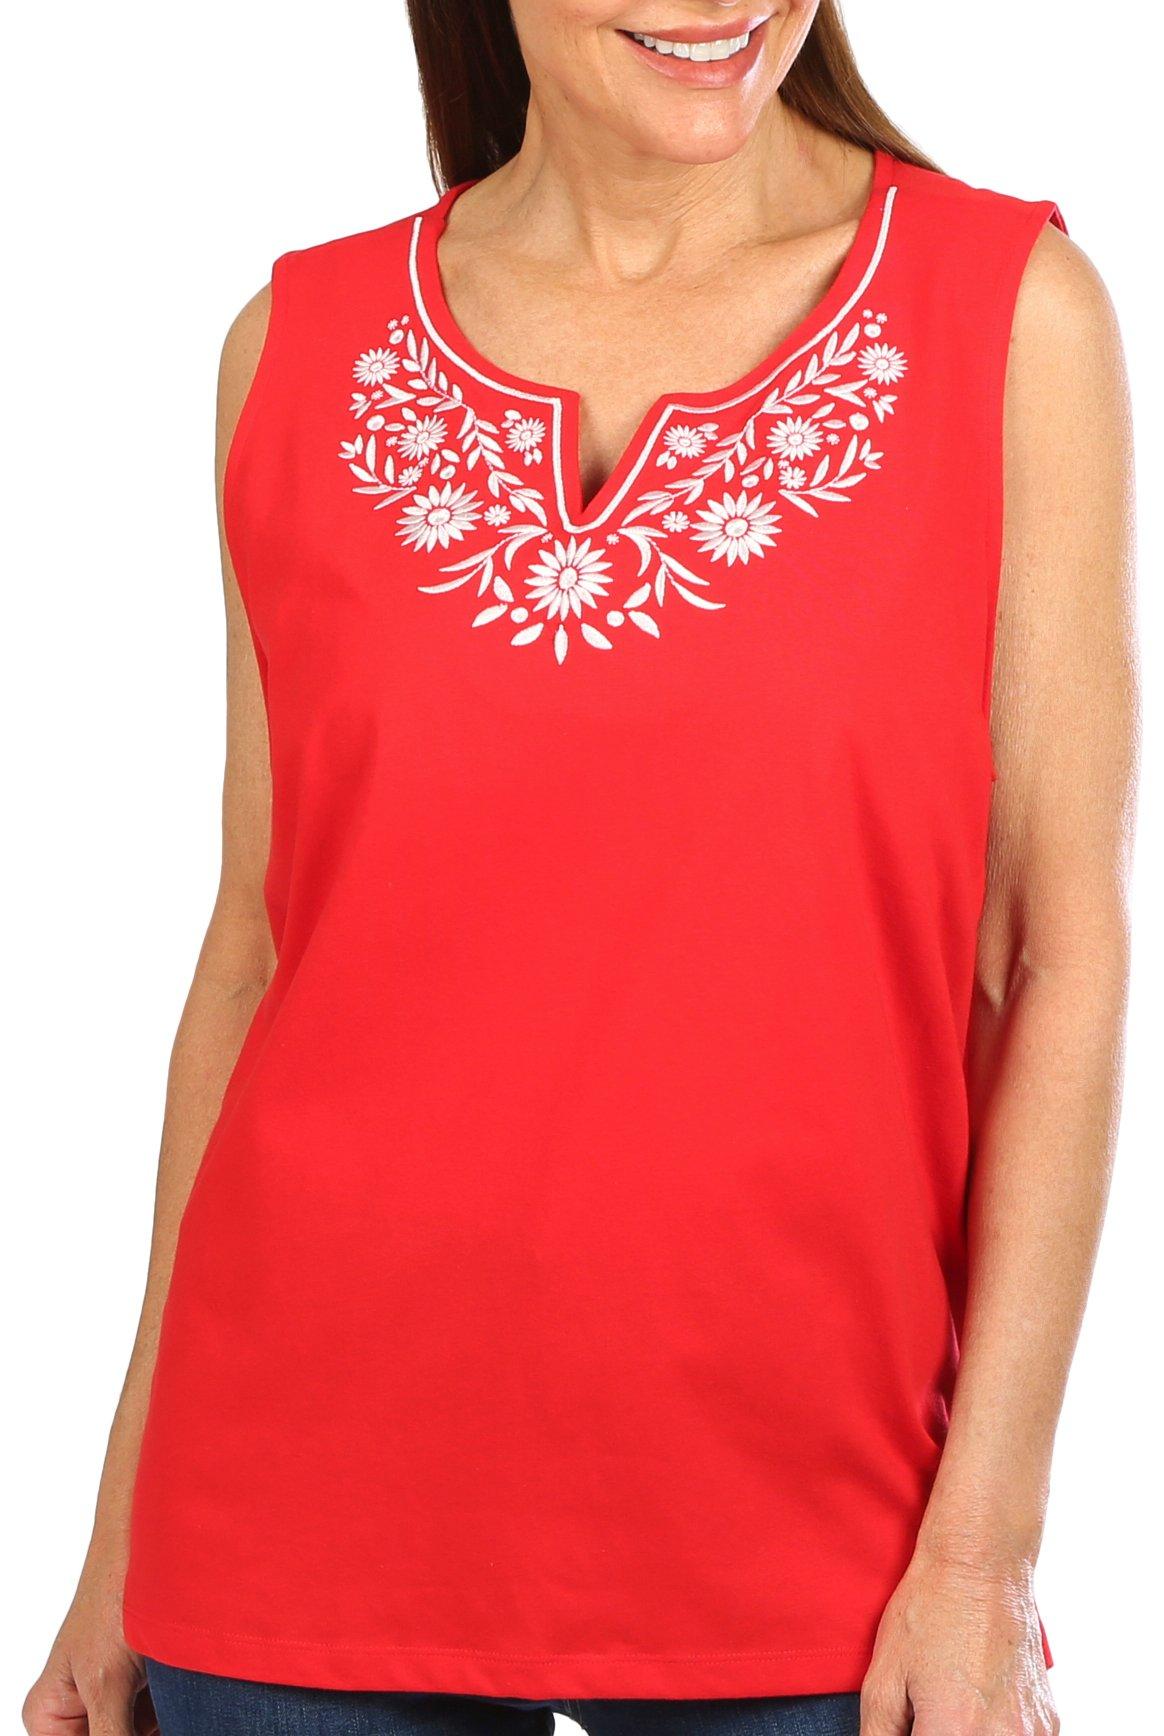 Coral Bay Petite Embroidered Sleeveless Top